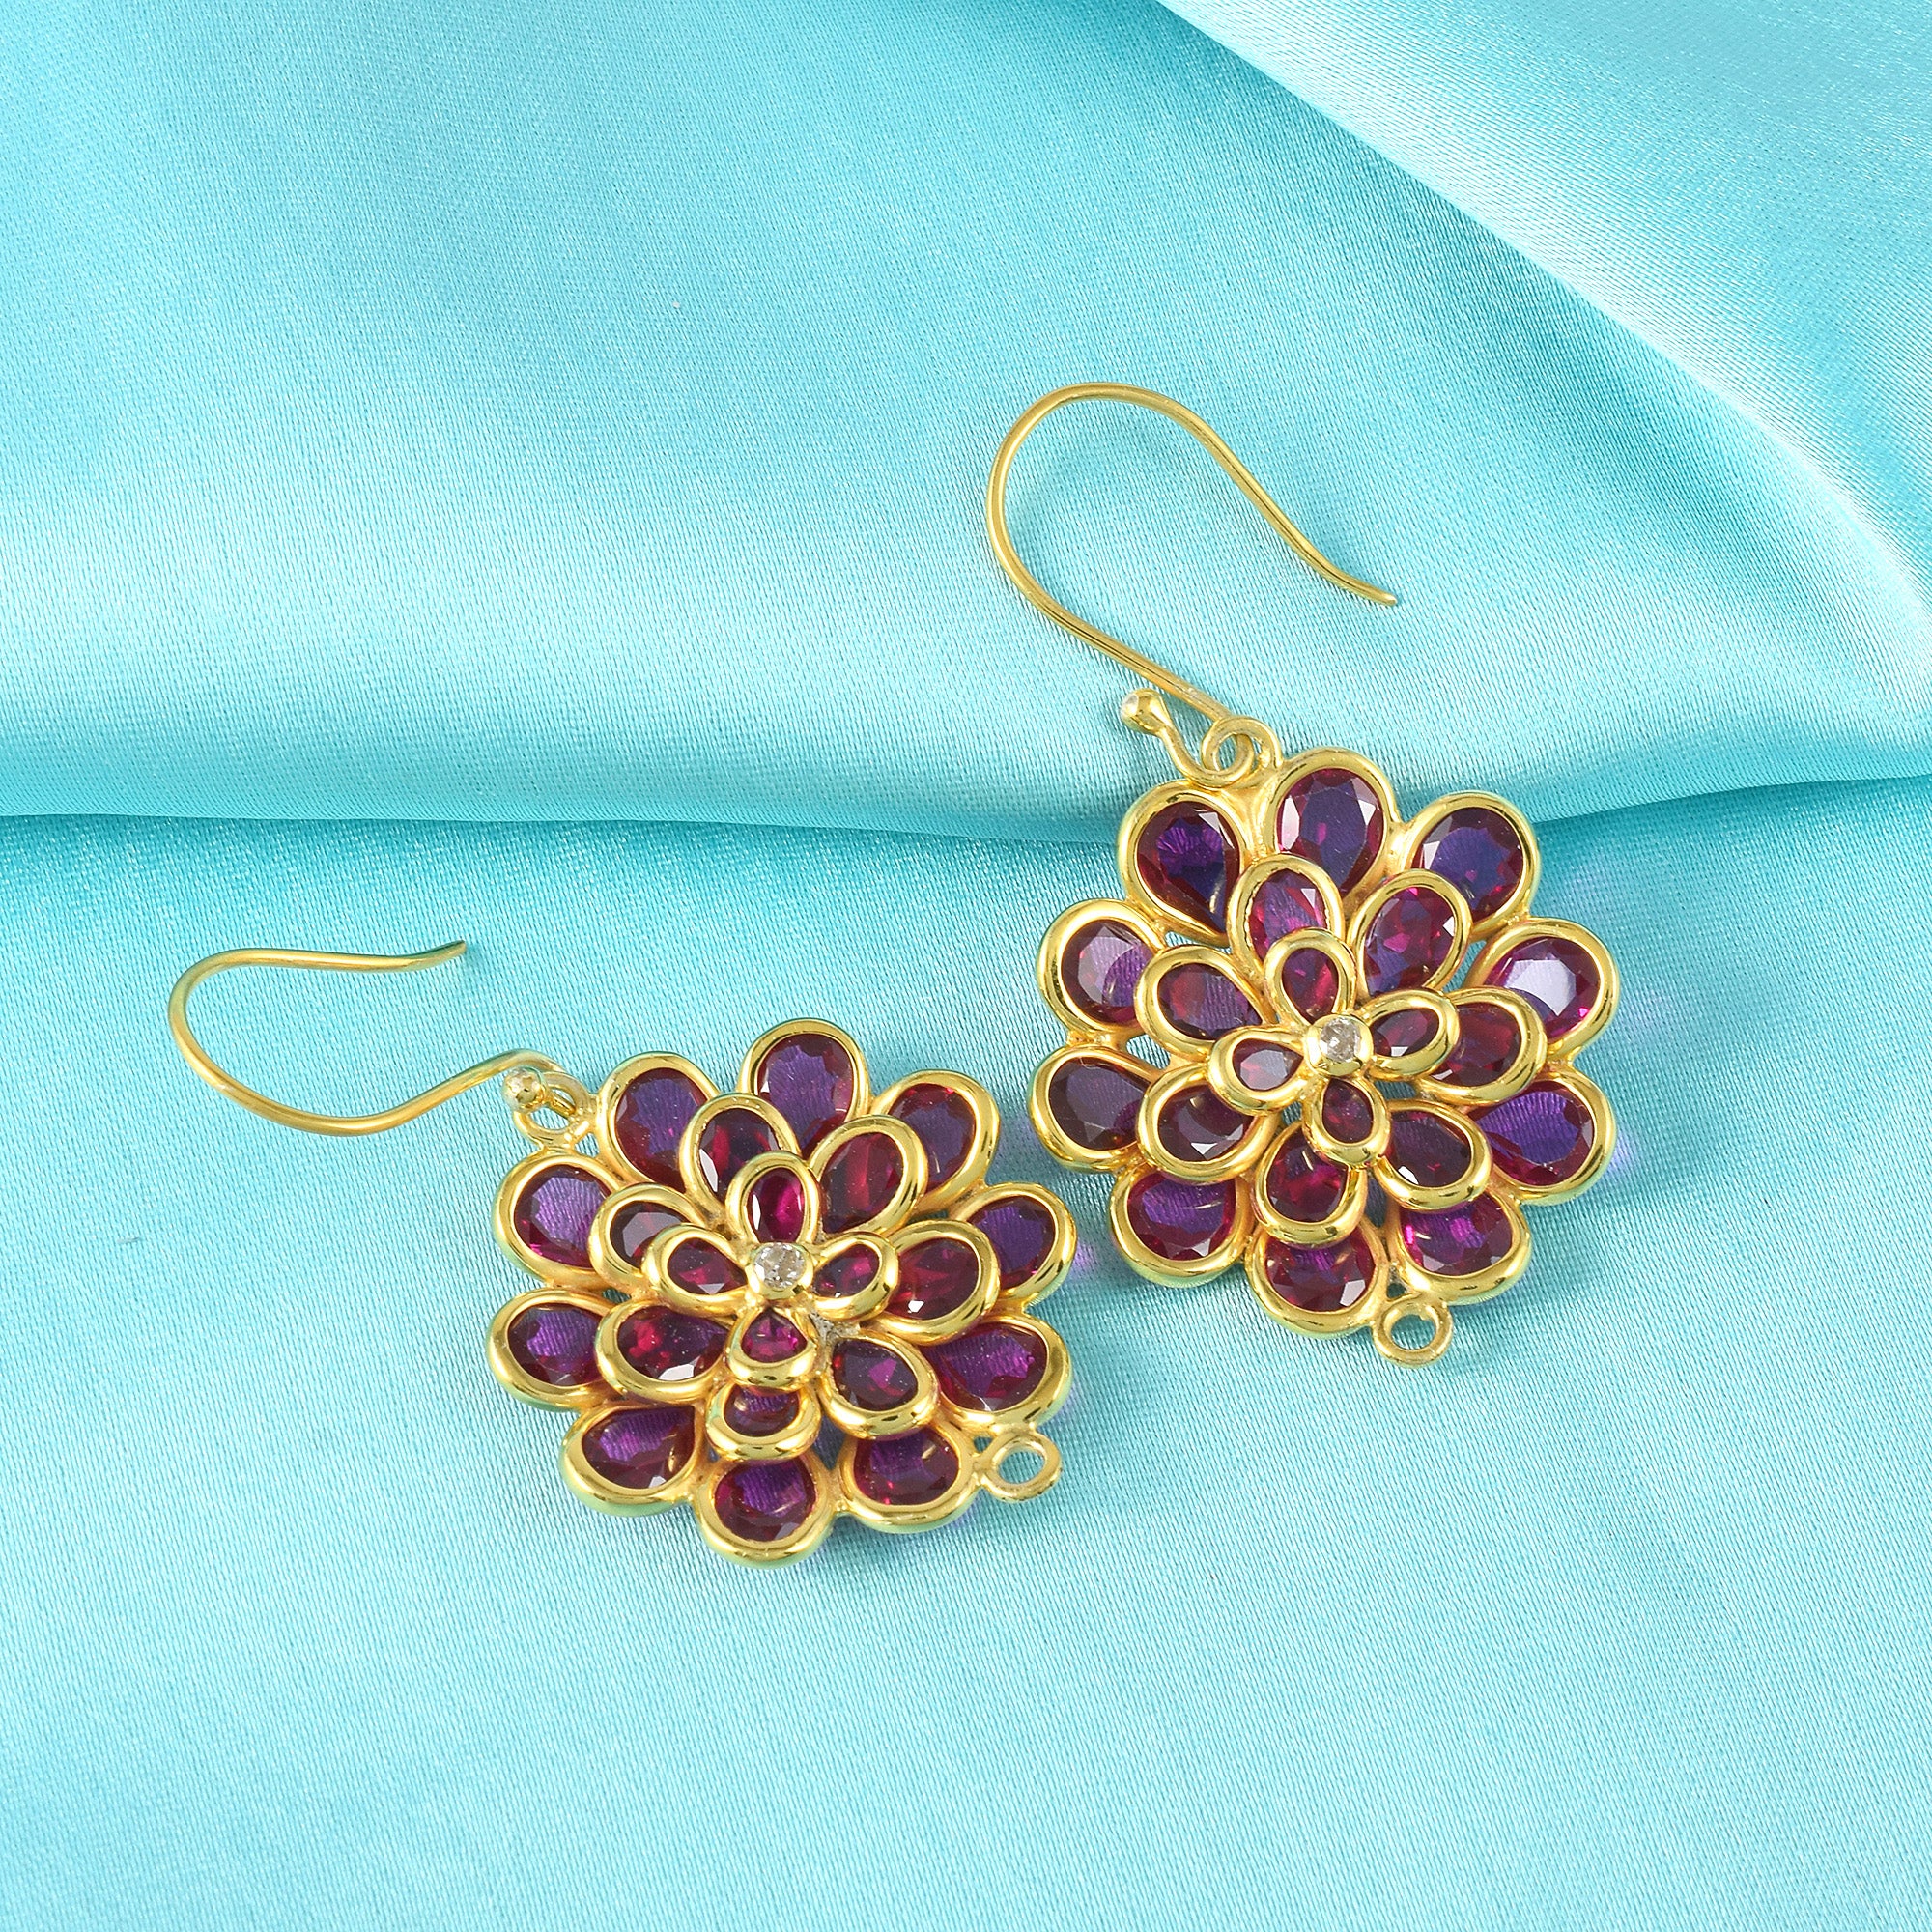 Sun-kissed Flower Drops Earrings Gold Plated With 14K Gold